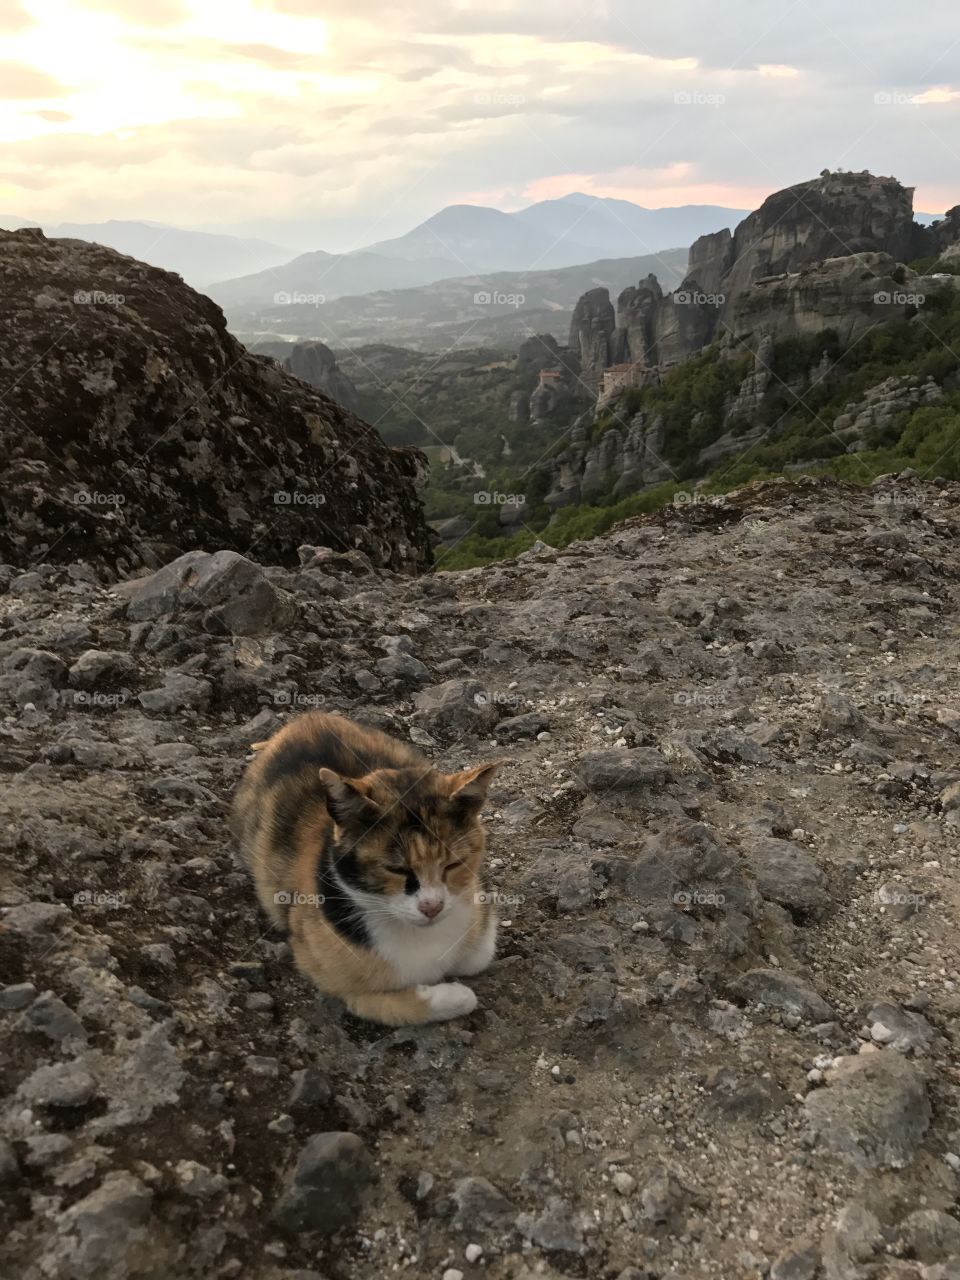 Checking out sunset and forming friendship in the Mountain in Meteora